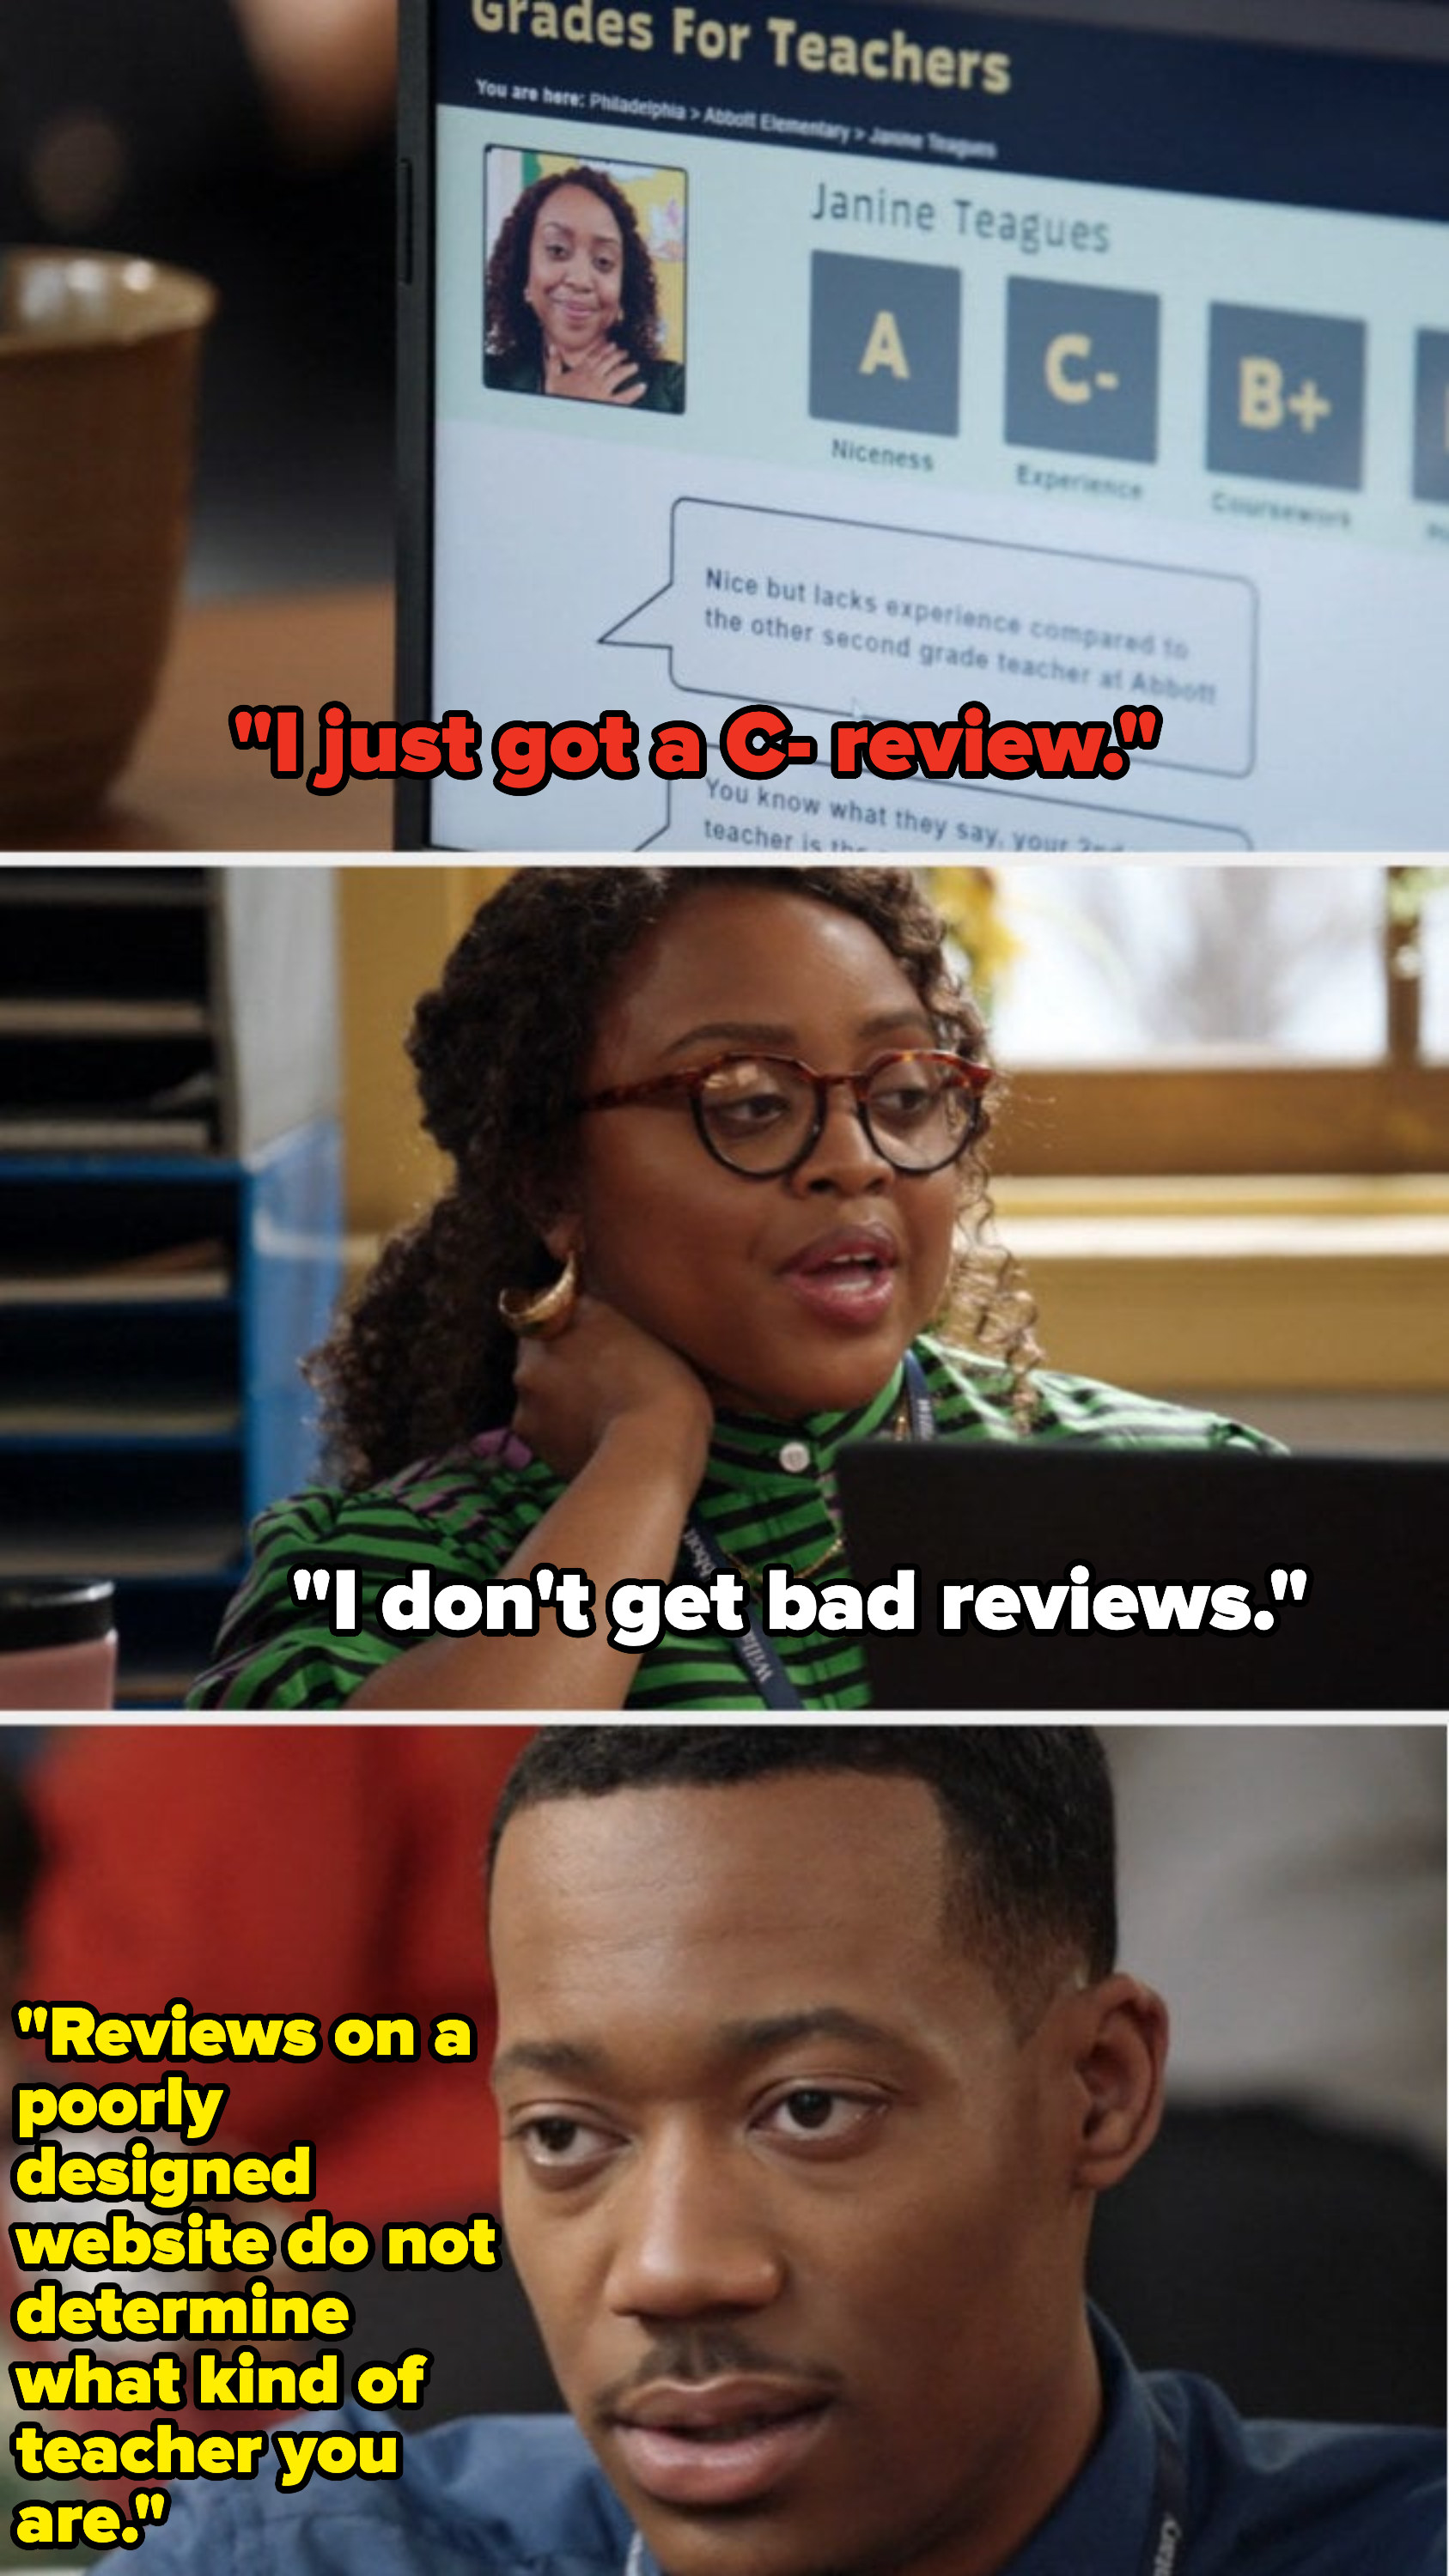 Gregory tells Janine that one negative online review doesn&#x27;t mean she&#x27;s not a great educator